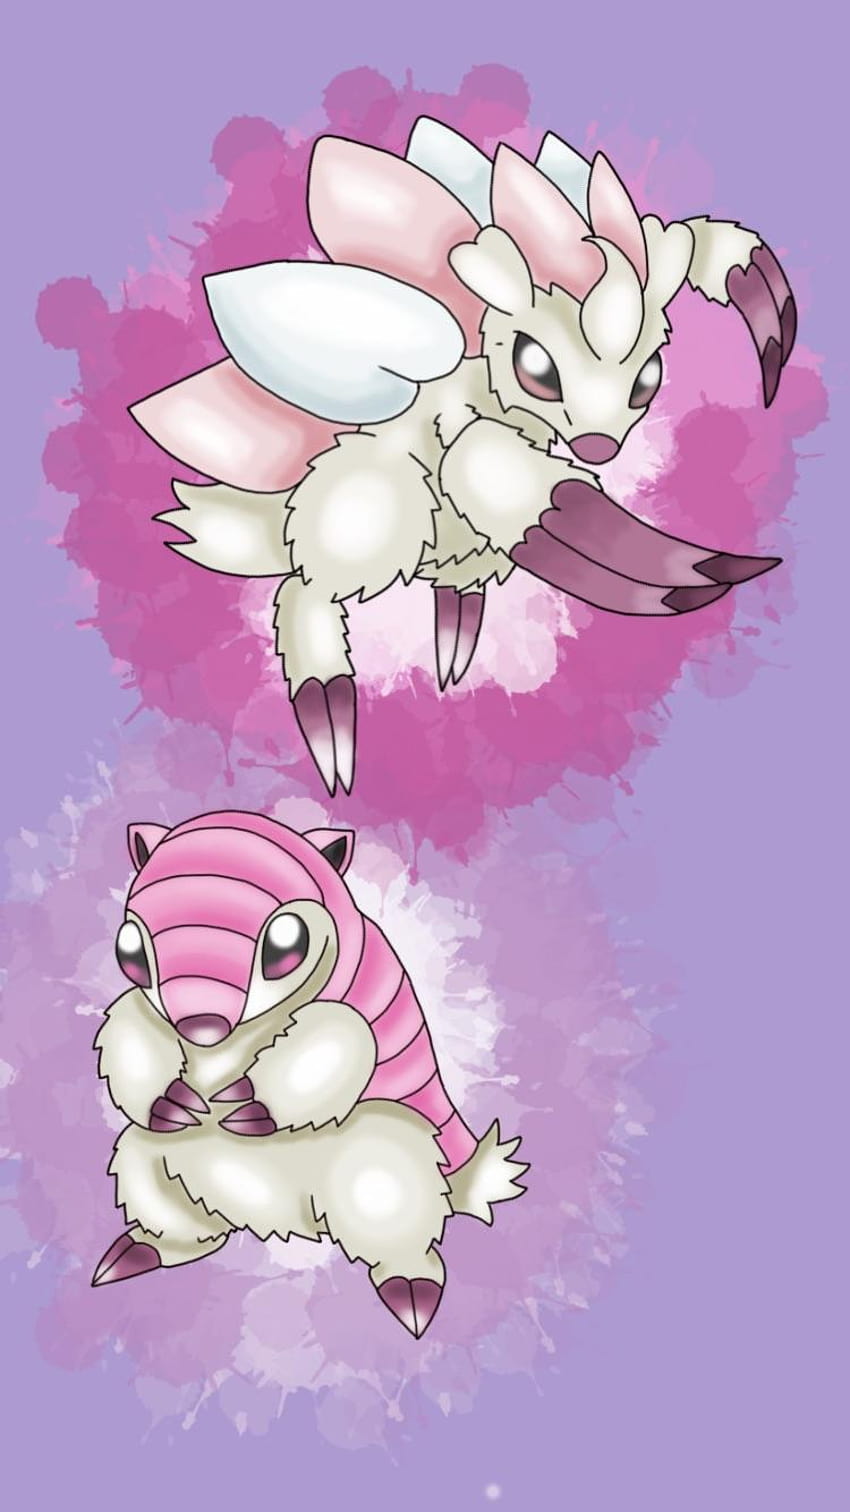 I created a new form for sandshrew and sandslash based on the 'pink, pink fairy armadillo HD phone wallpaper